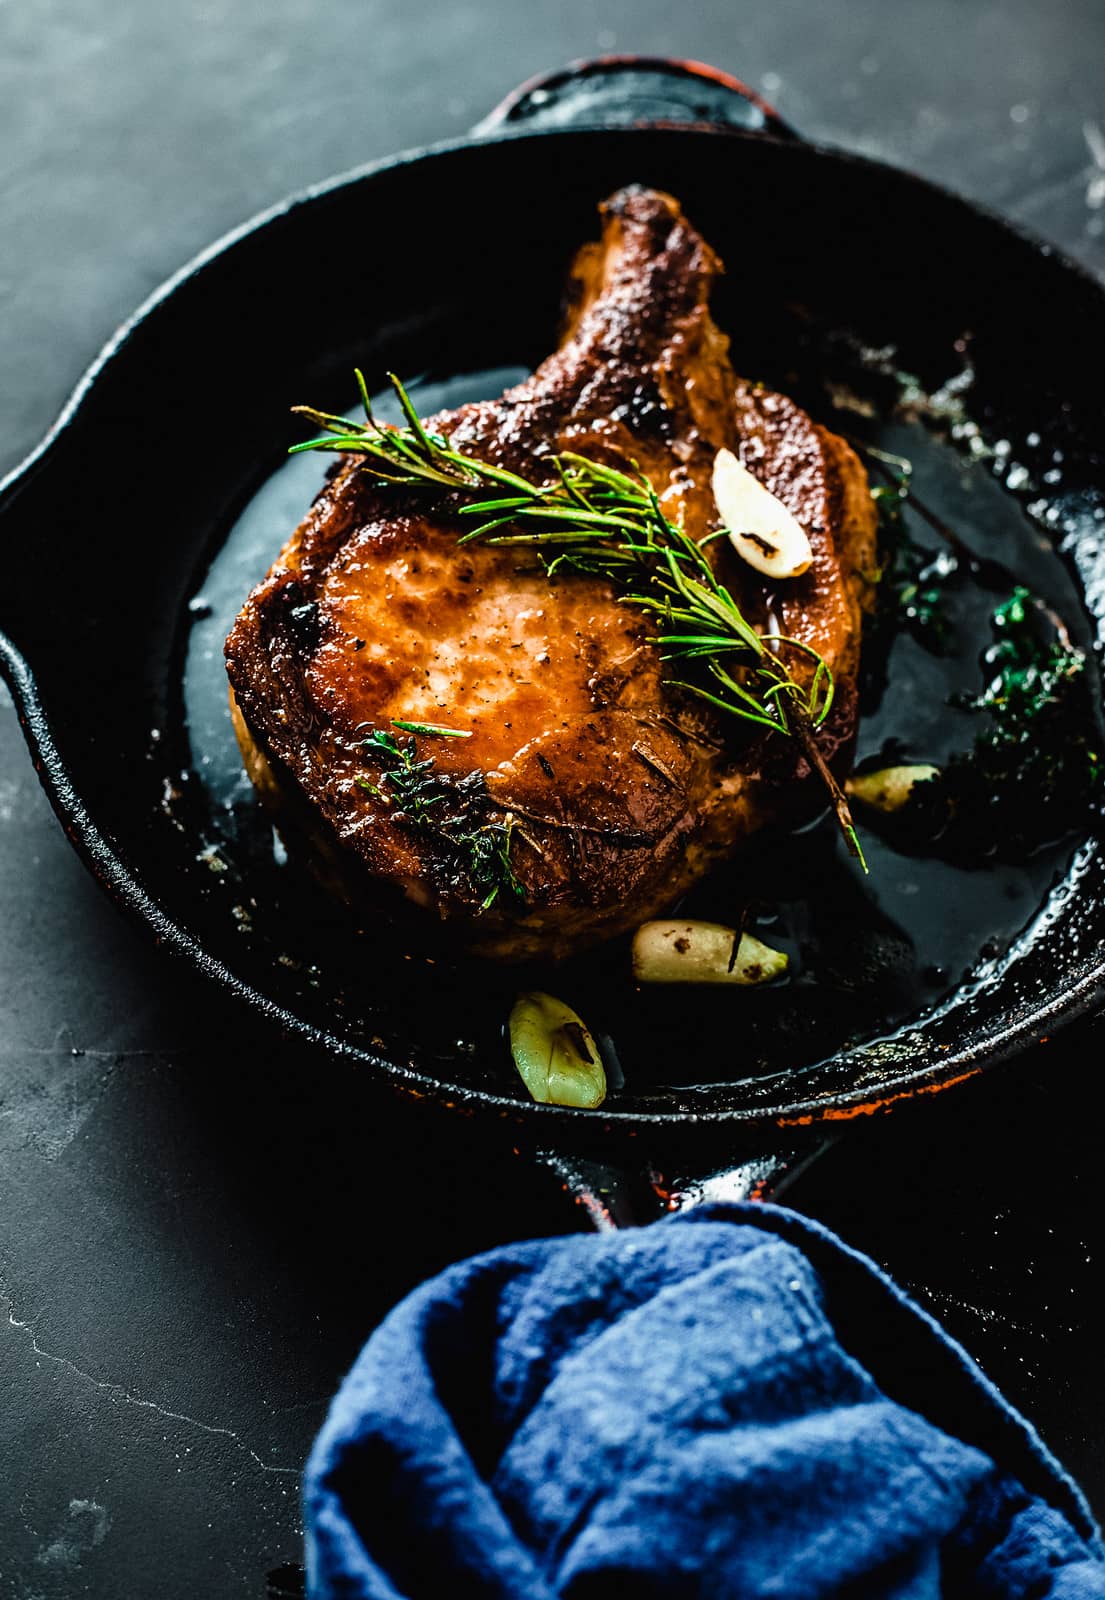 A pork chop with rosemary and garlic in a black skillet.